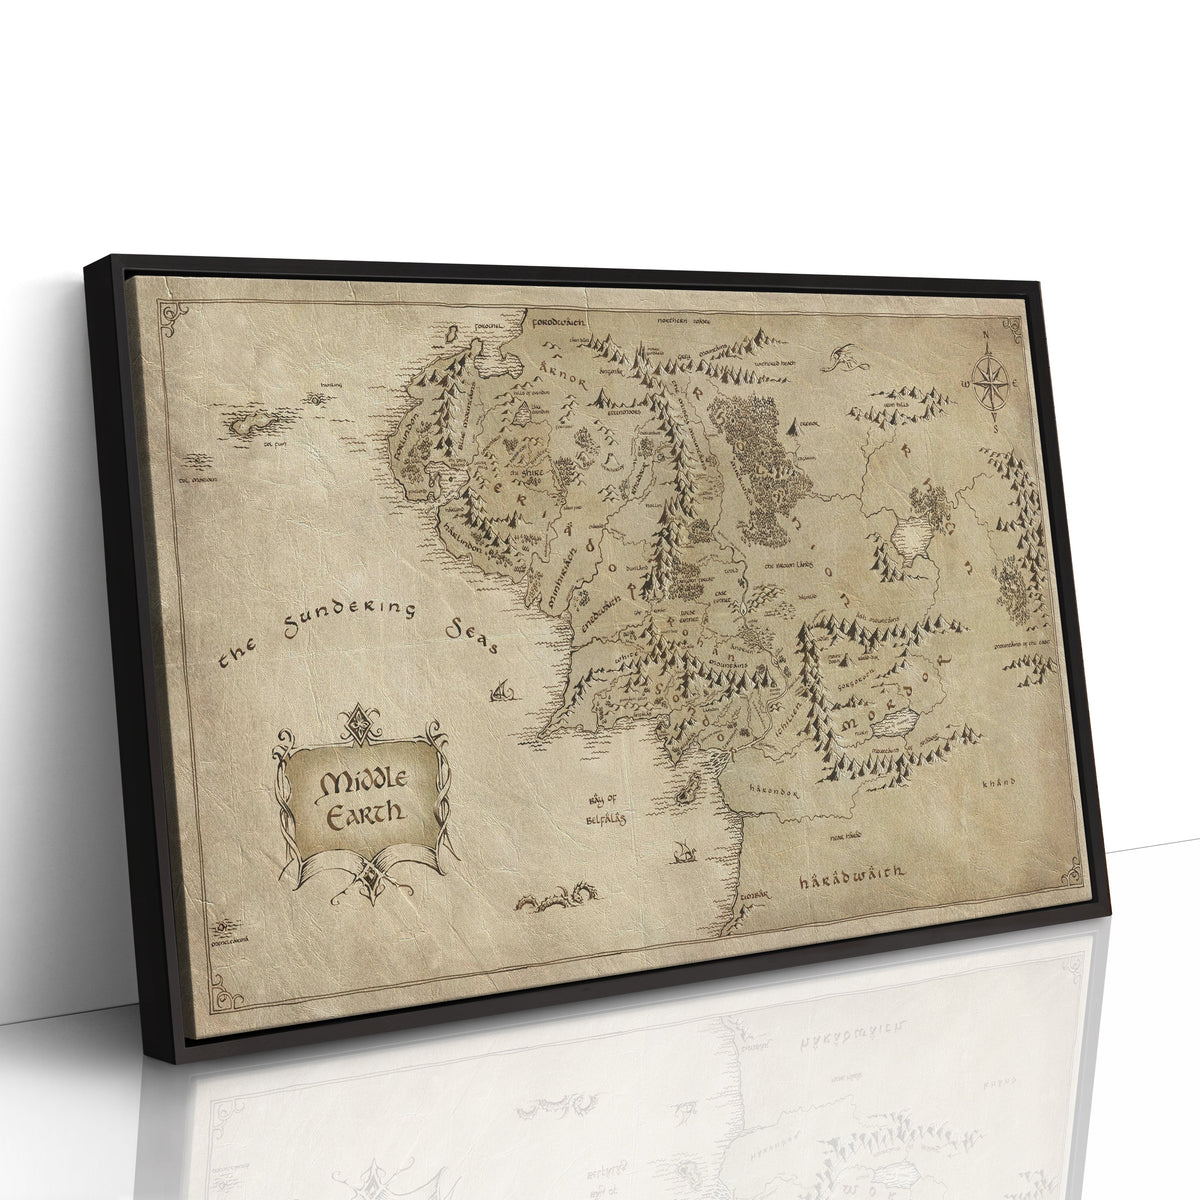 LOTR Middle Earth Map Wall Art